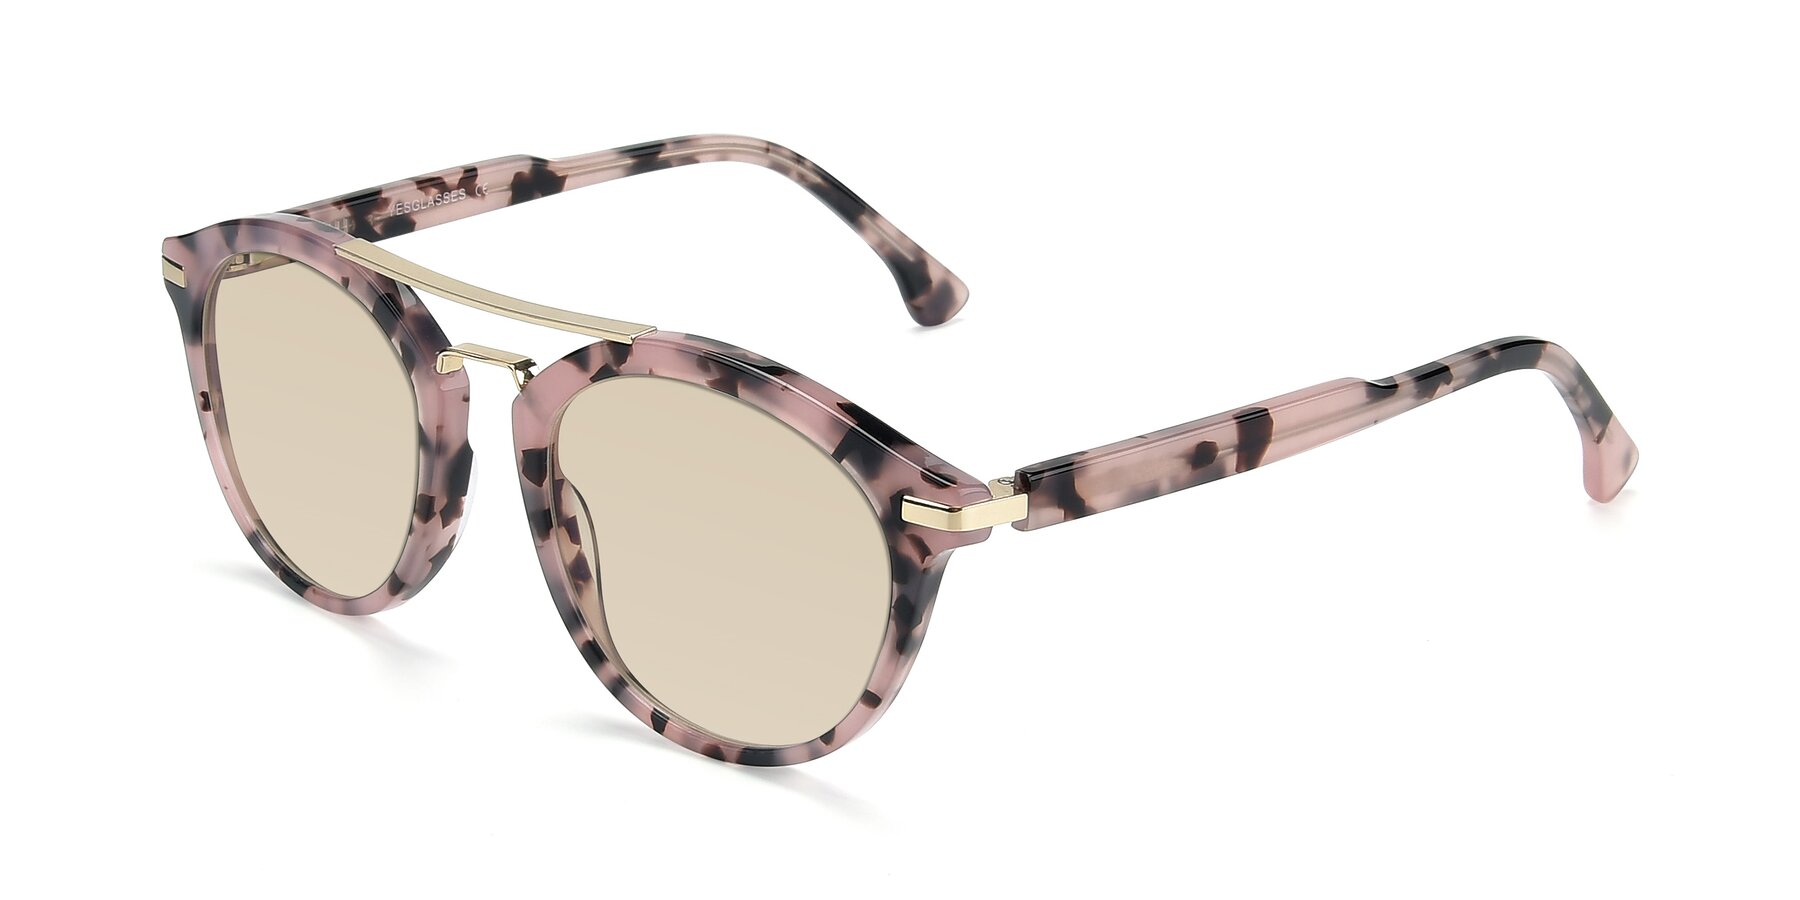 Angle of 17236 in Havana Floral-Gold with Light Brown Tinted Lenses